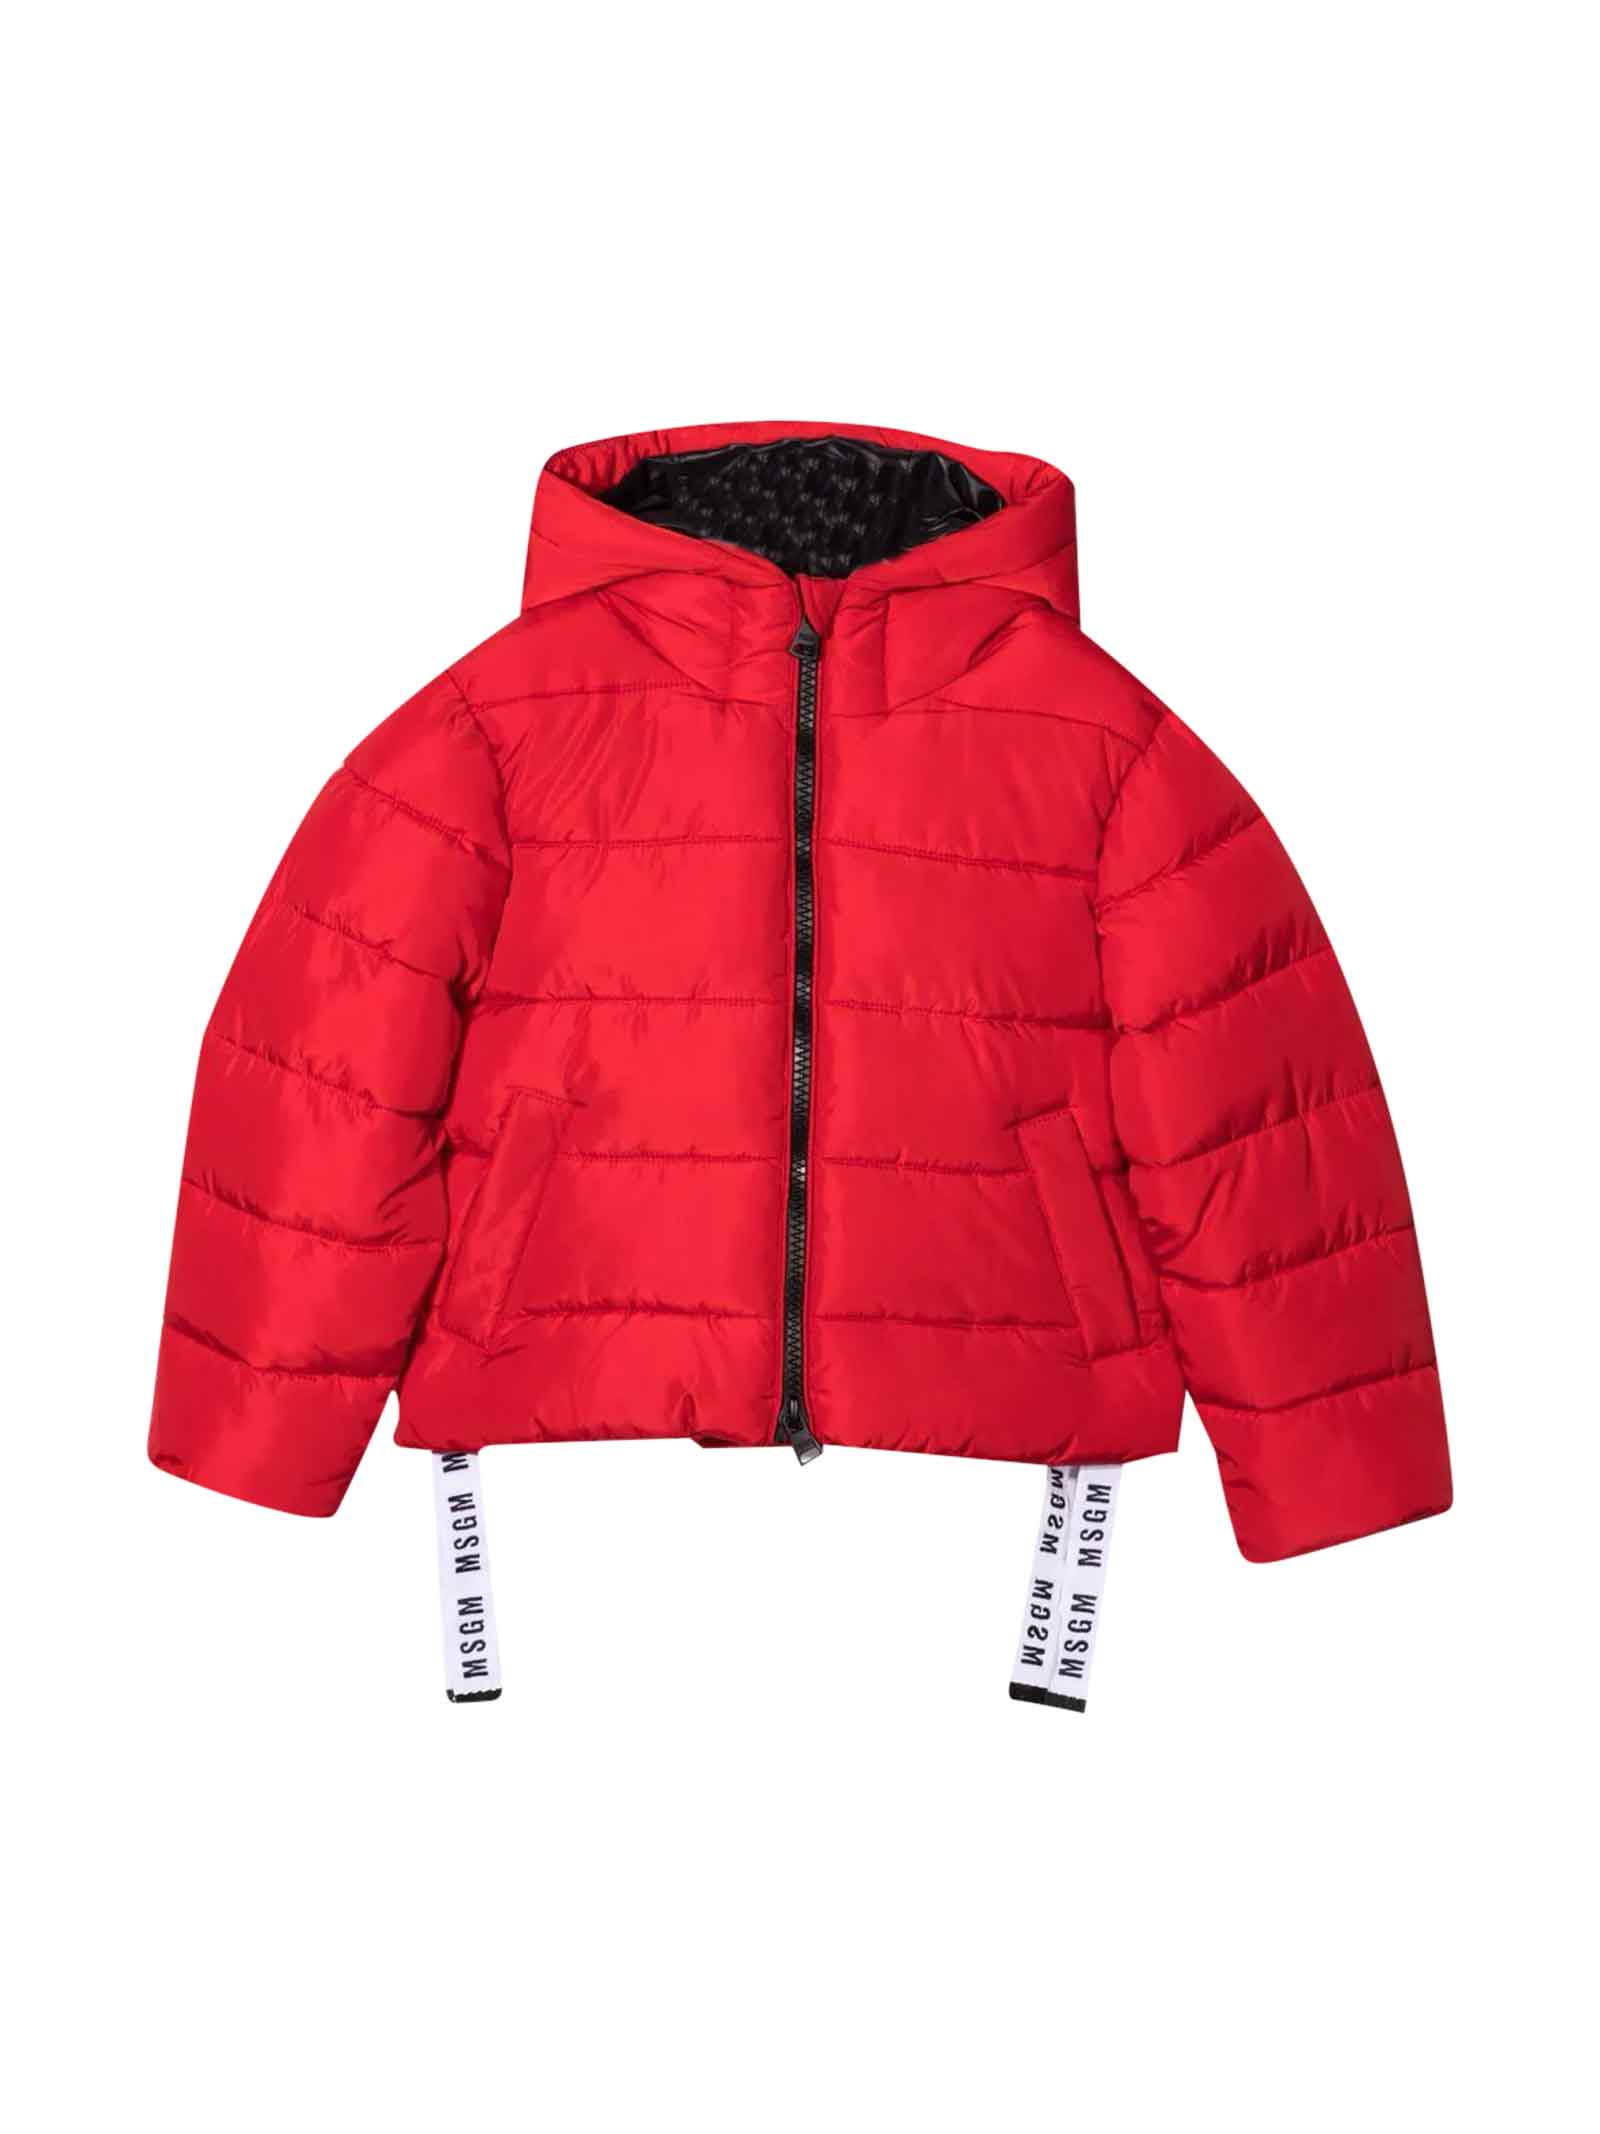 MSGM Red Down Jacket